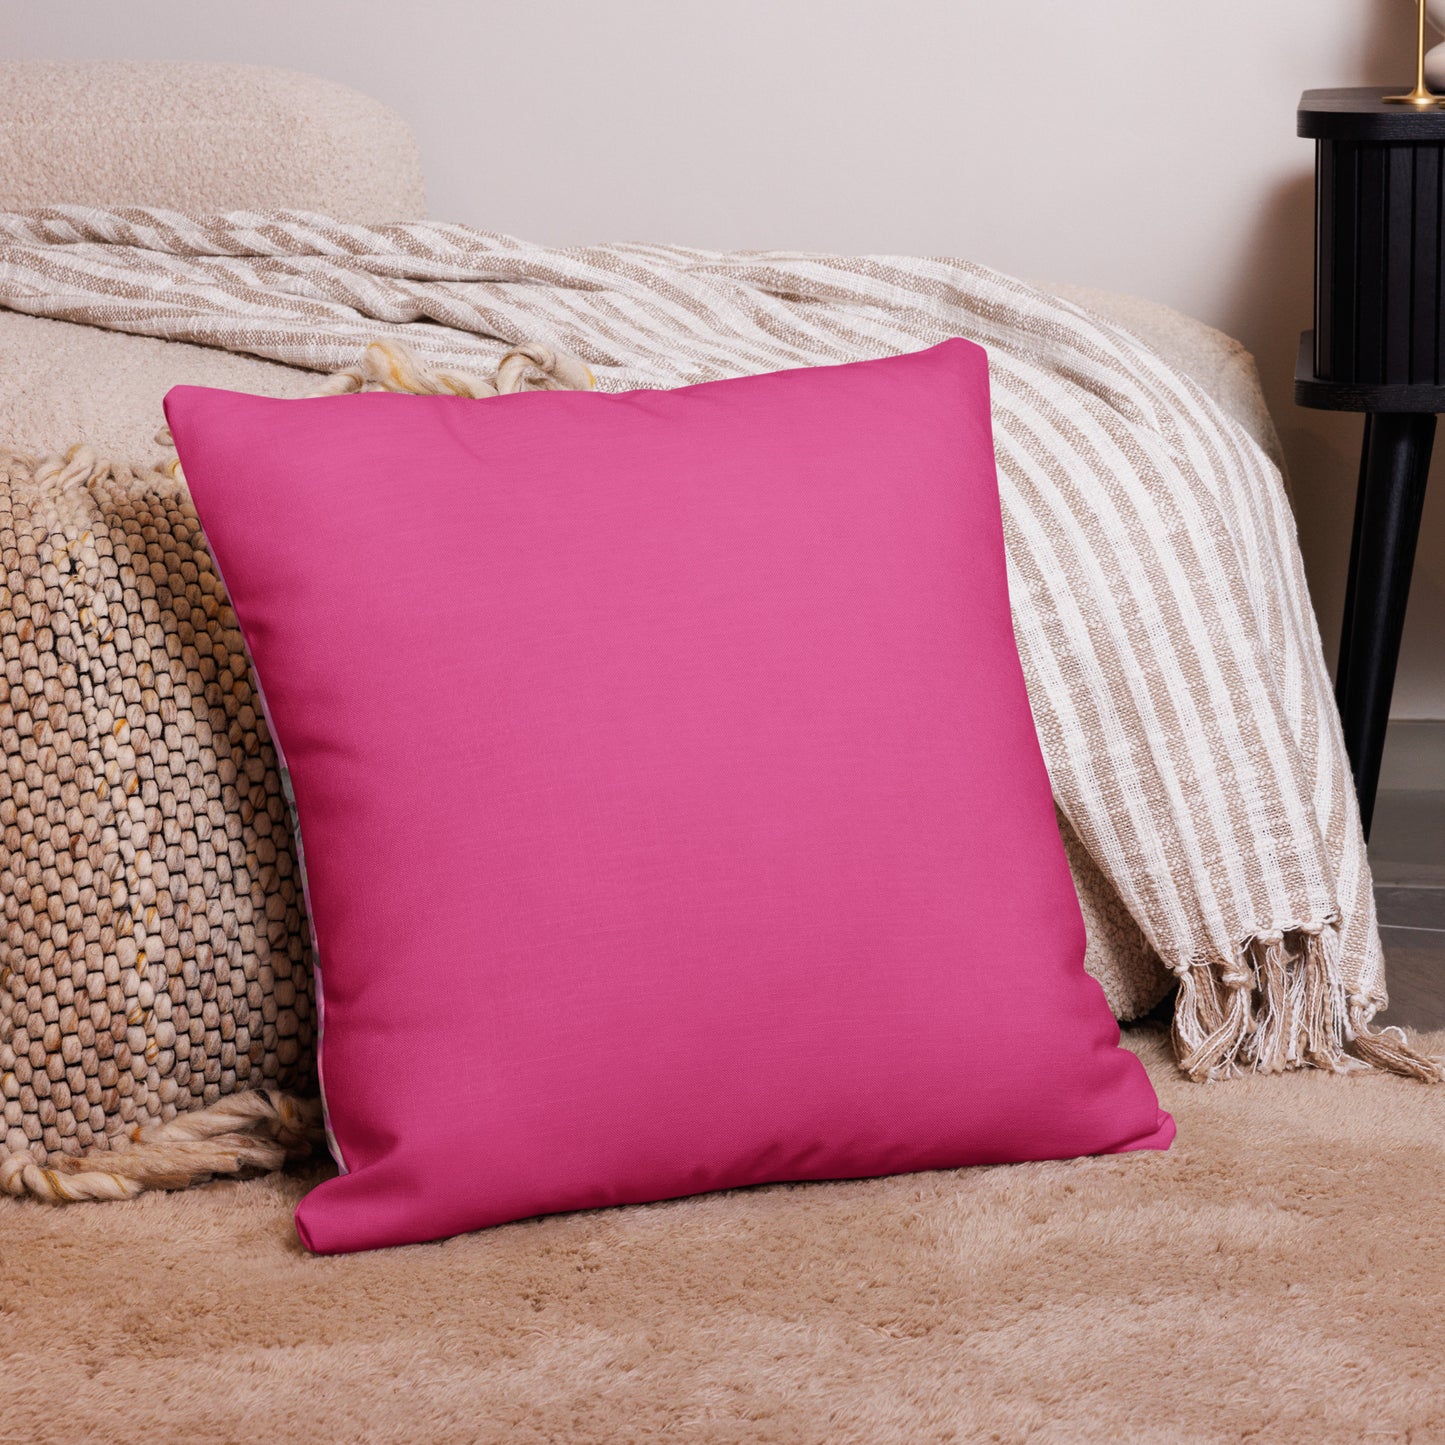 Our Mom Critiques Wildbow Premium Pillow